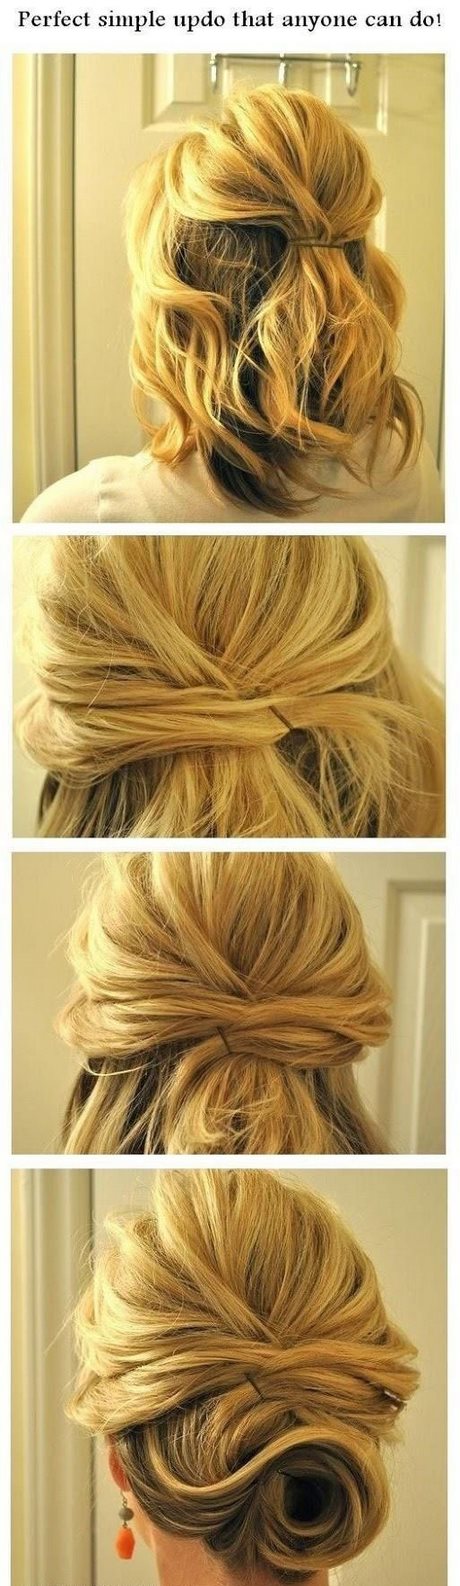 updos-you-can-do-yourself-38 Updos you can do yourself